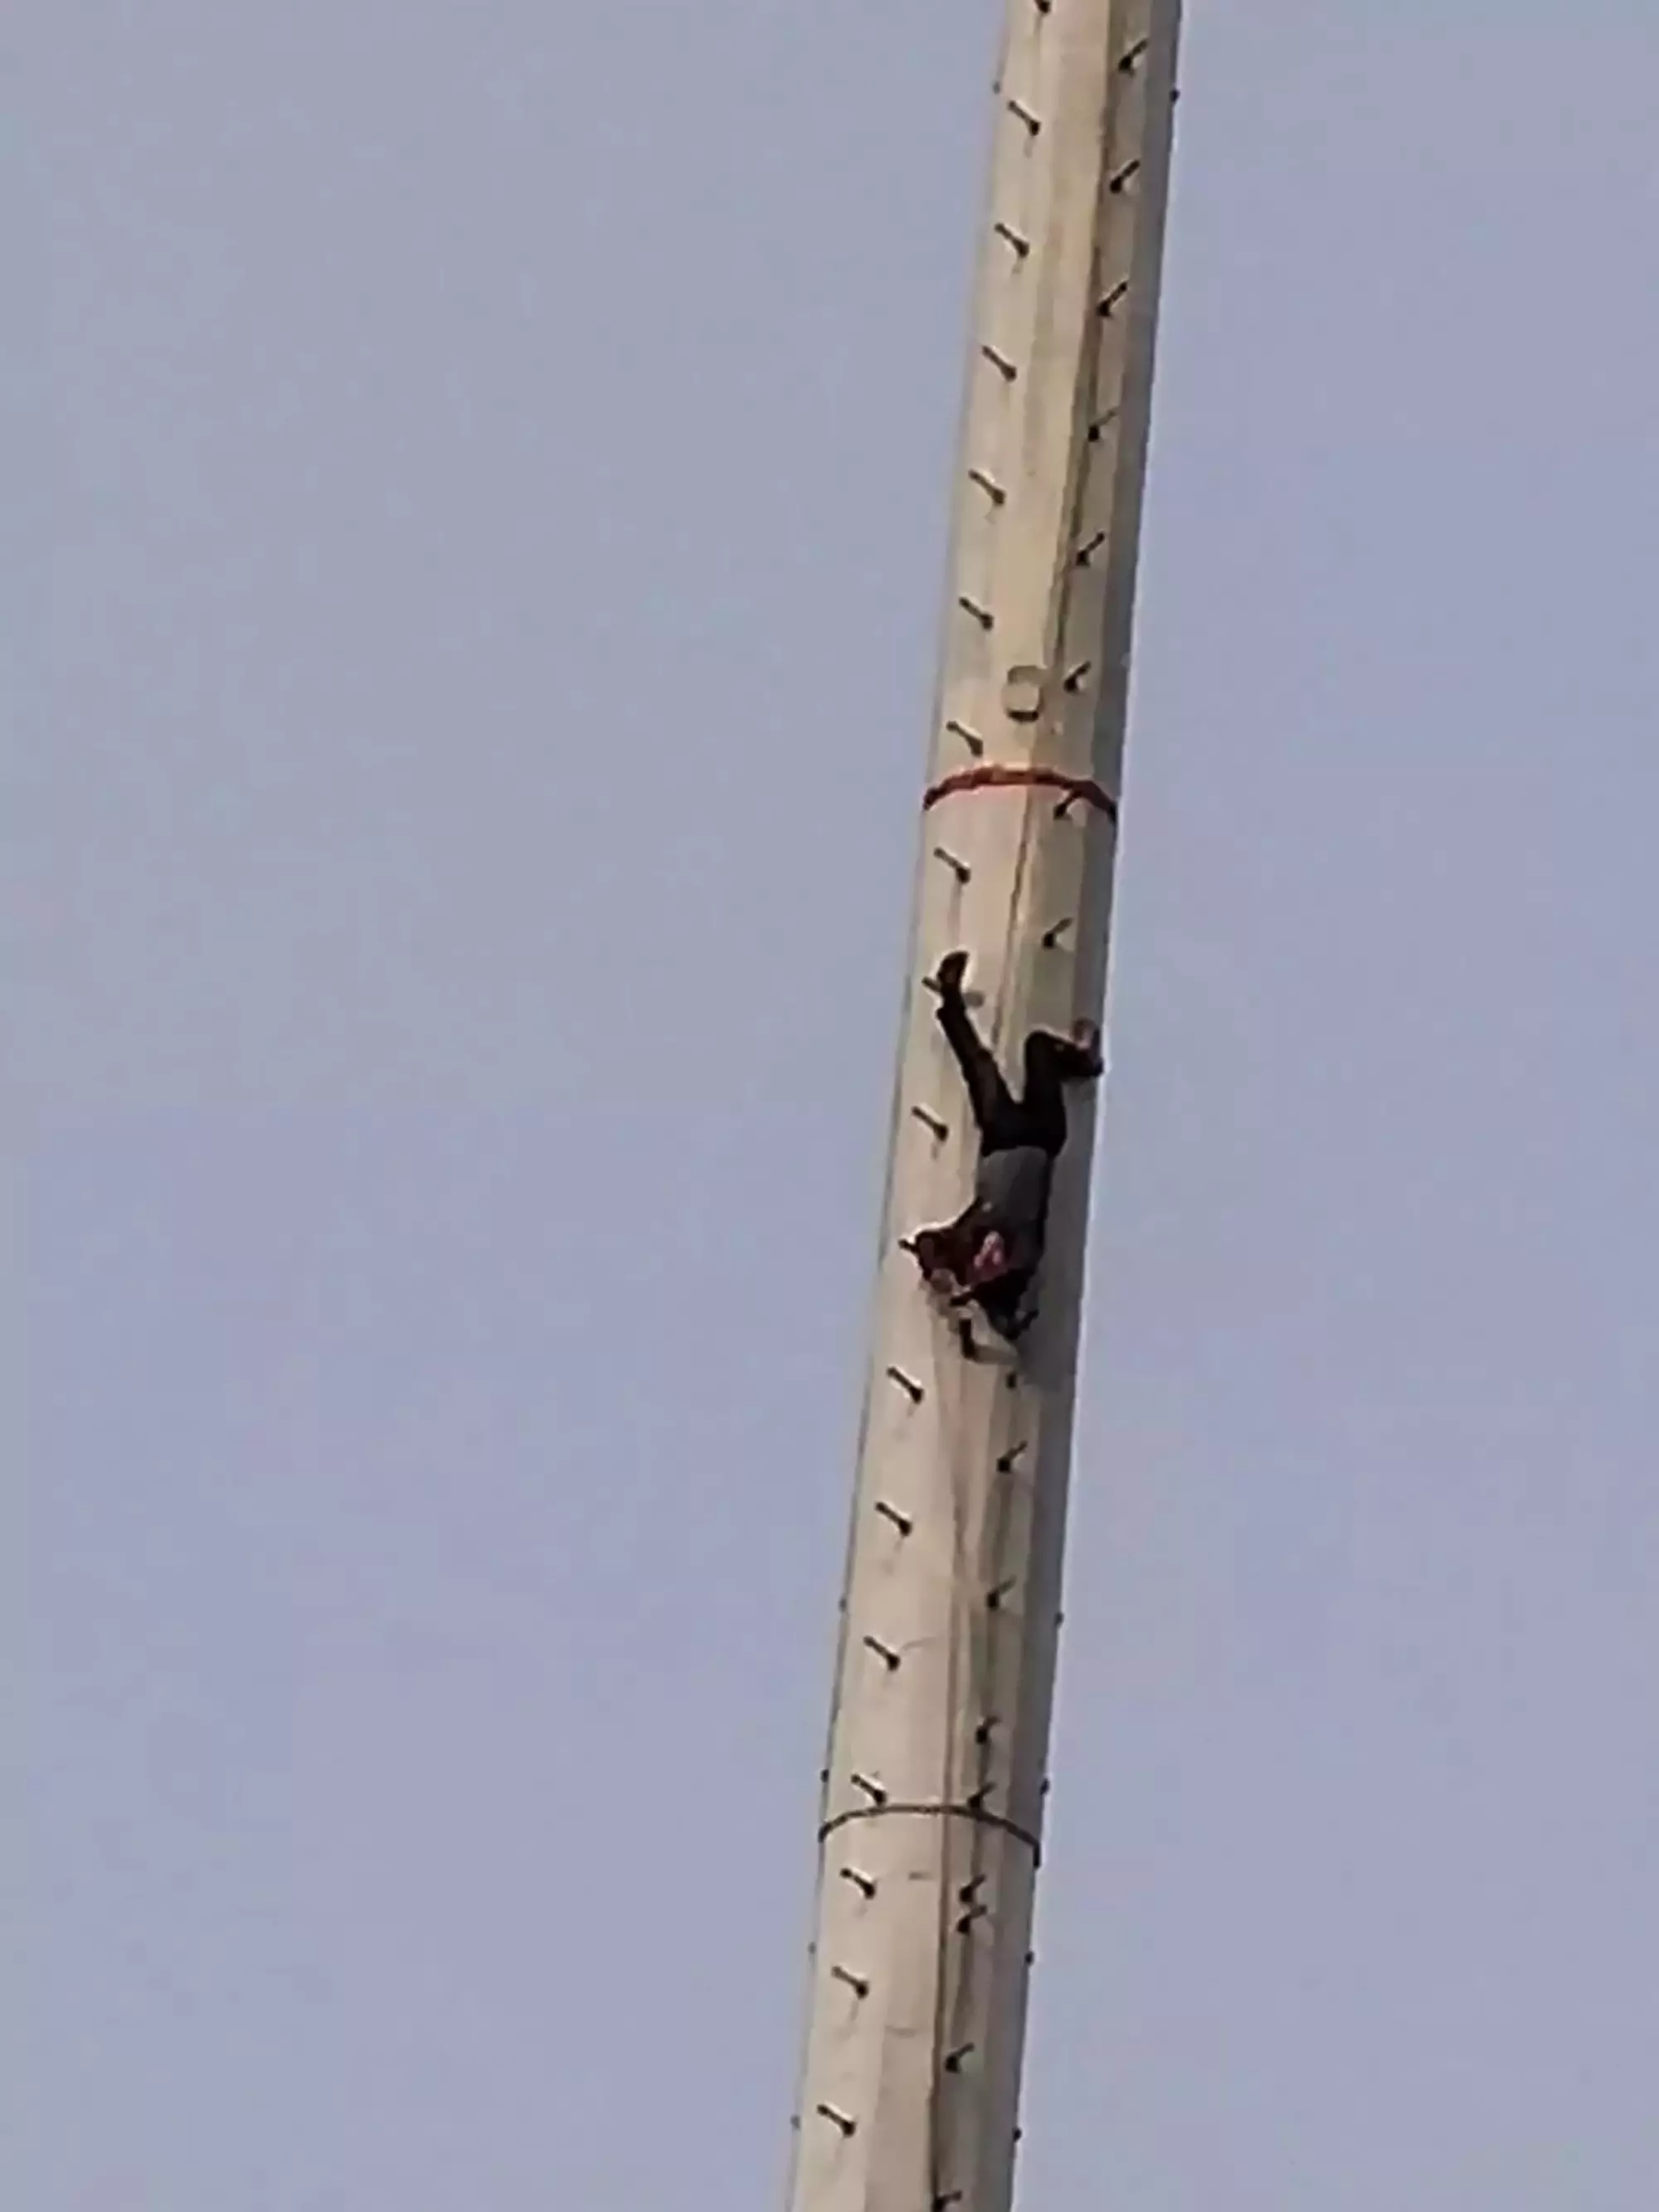 The man can be seen hanging upside down.